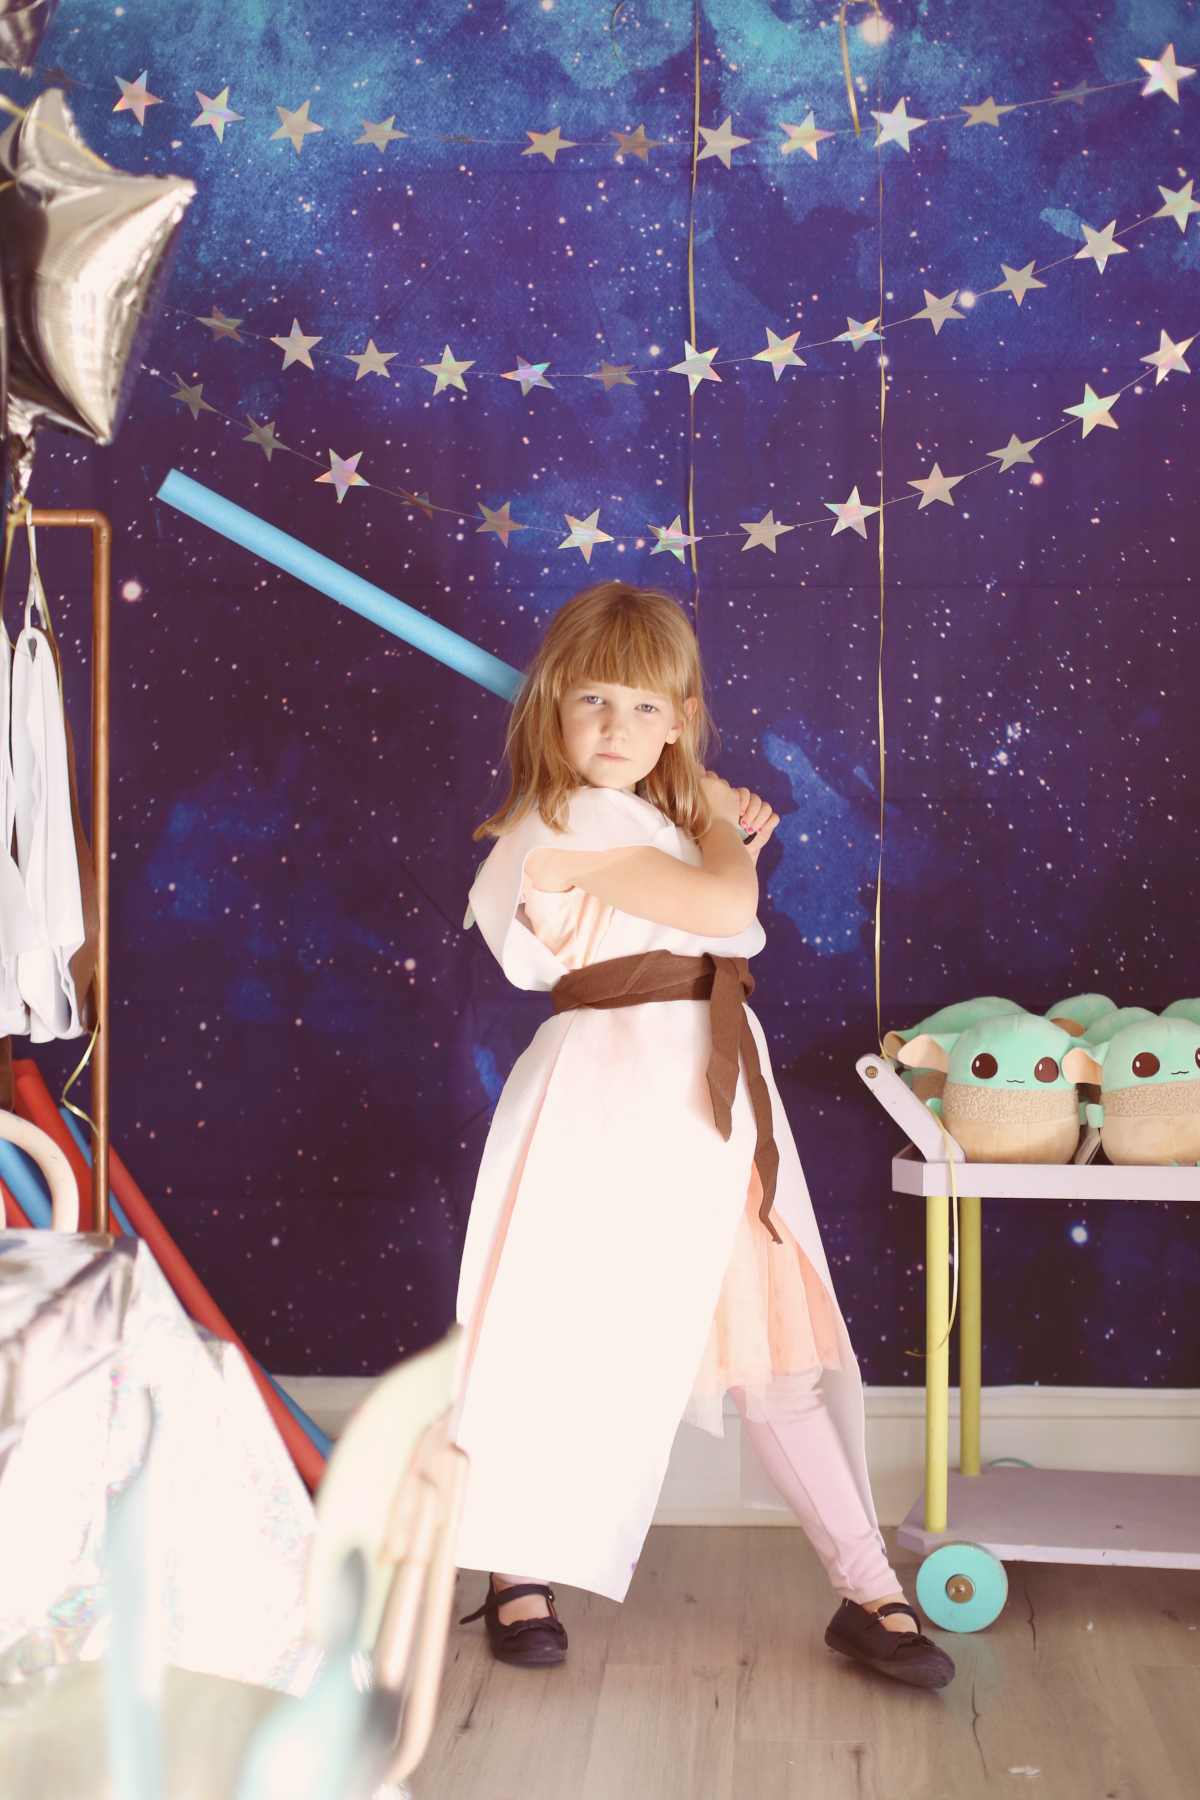 Star Wars party ideas for a boy or girl